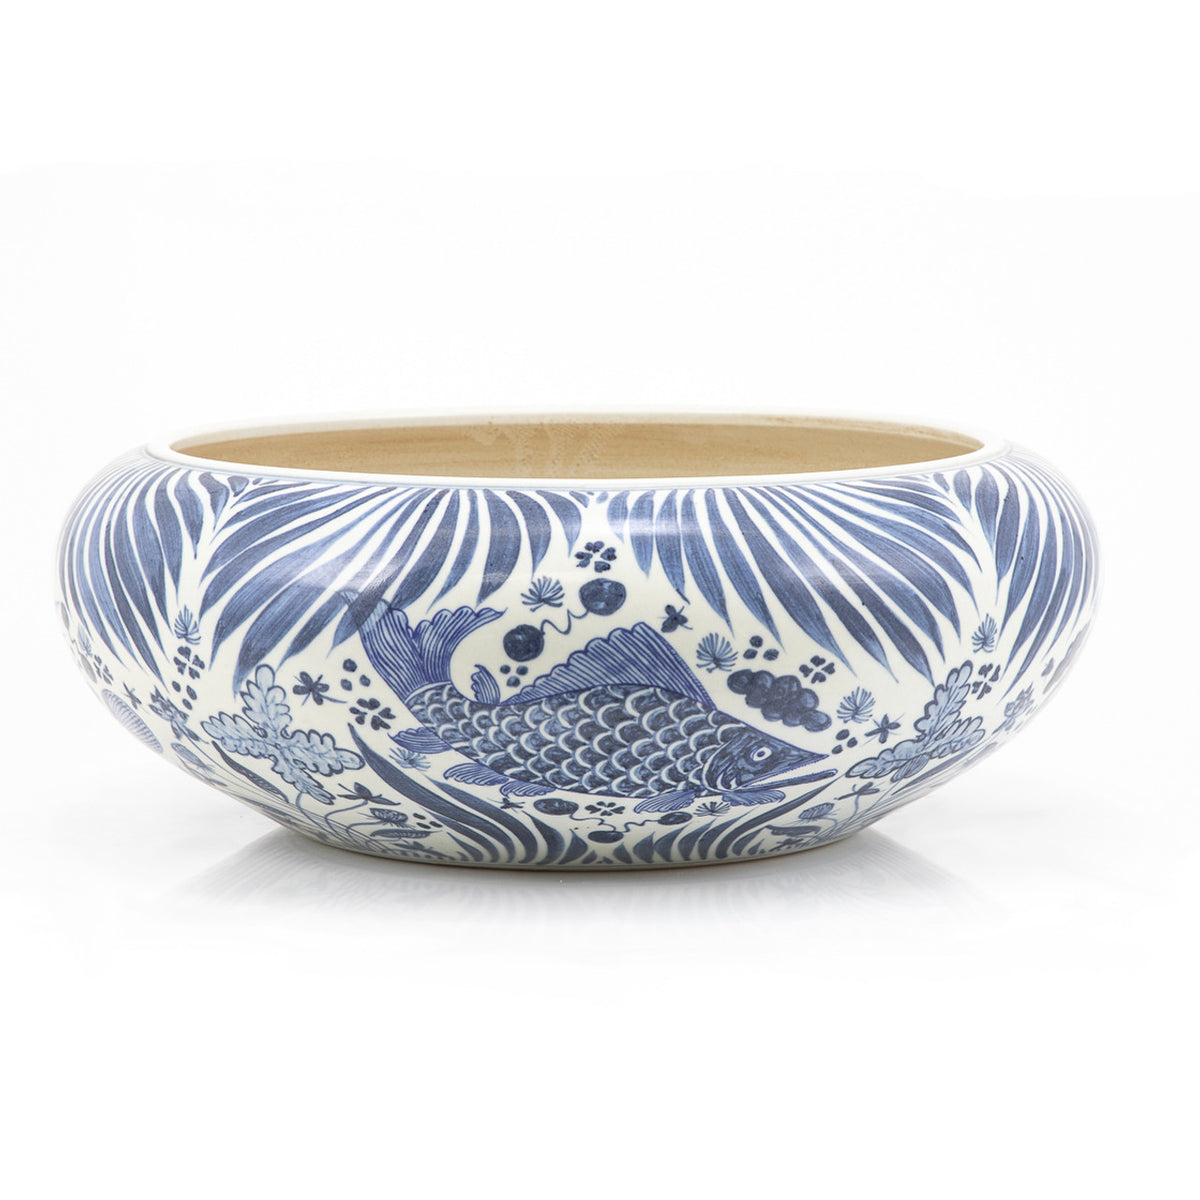 Shallow Bowl Blue And White Fish Motif Large - 13 Inch Wide